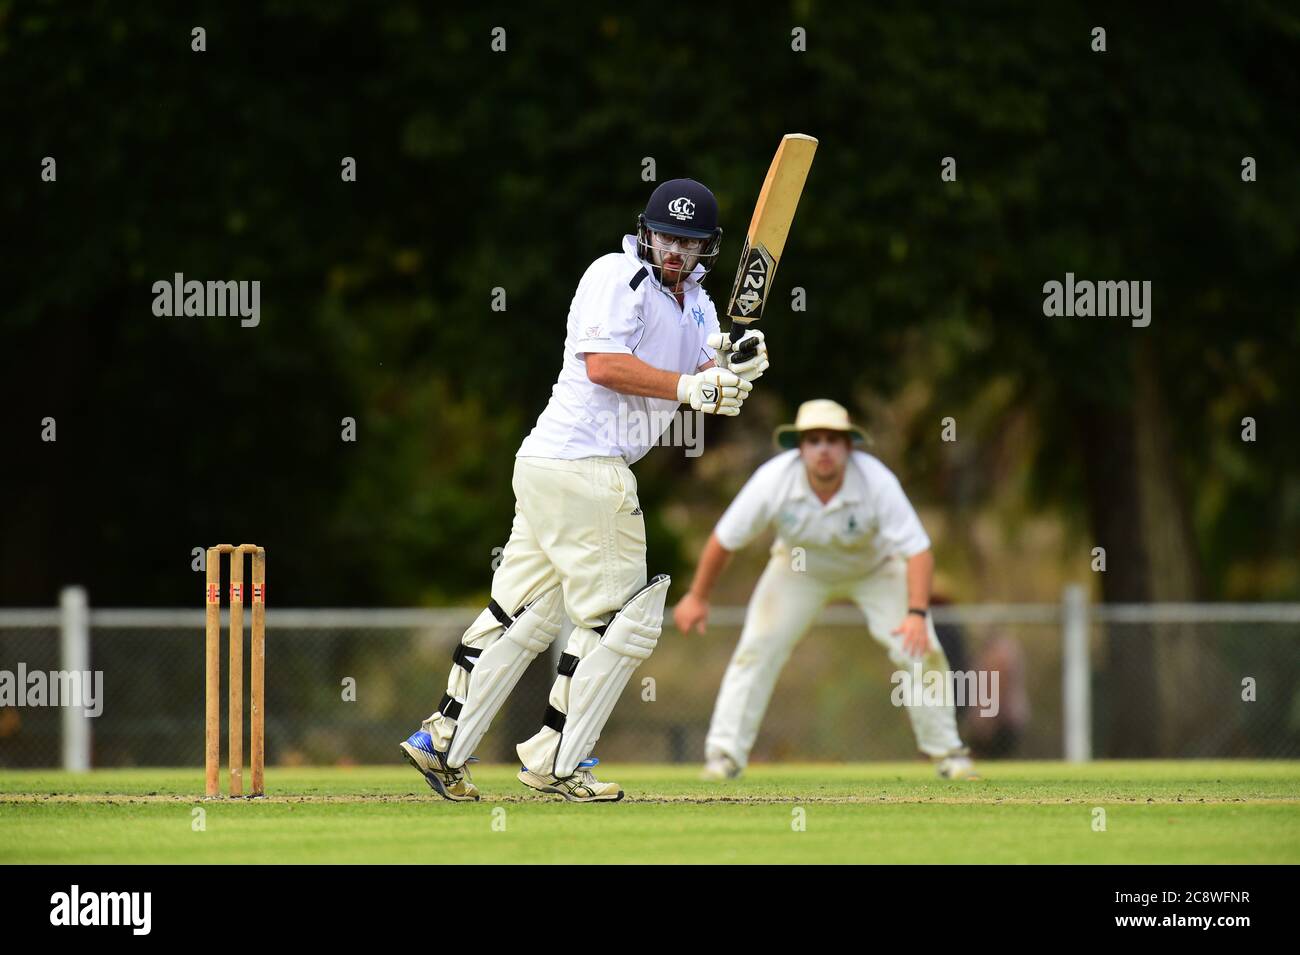 A cricketer decides whether to run as a fielder watches on during a cricket match in Victoria, Australia Stock Photo